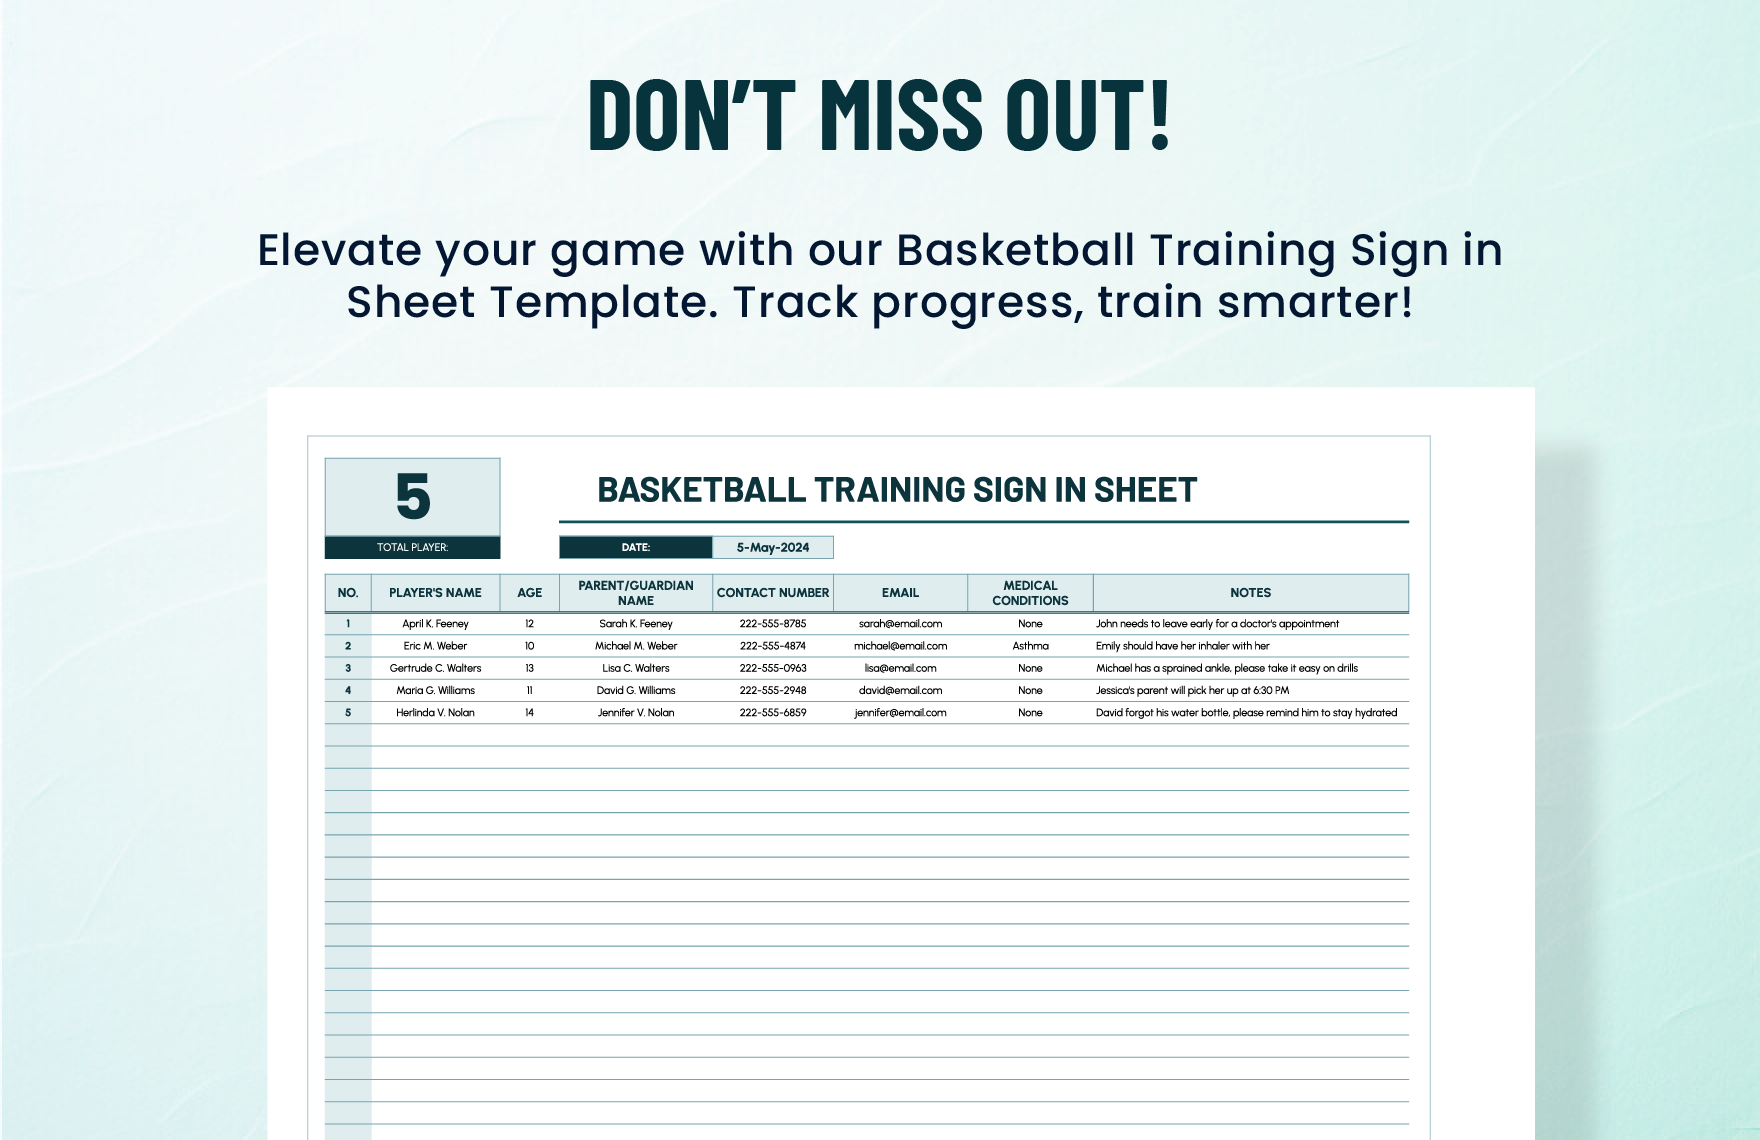 Basketball Training Sign in Sheet Template